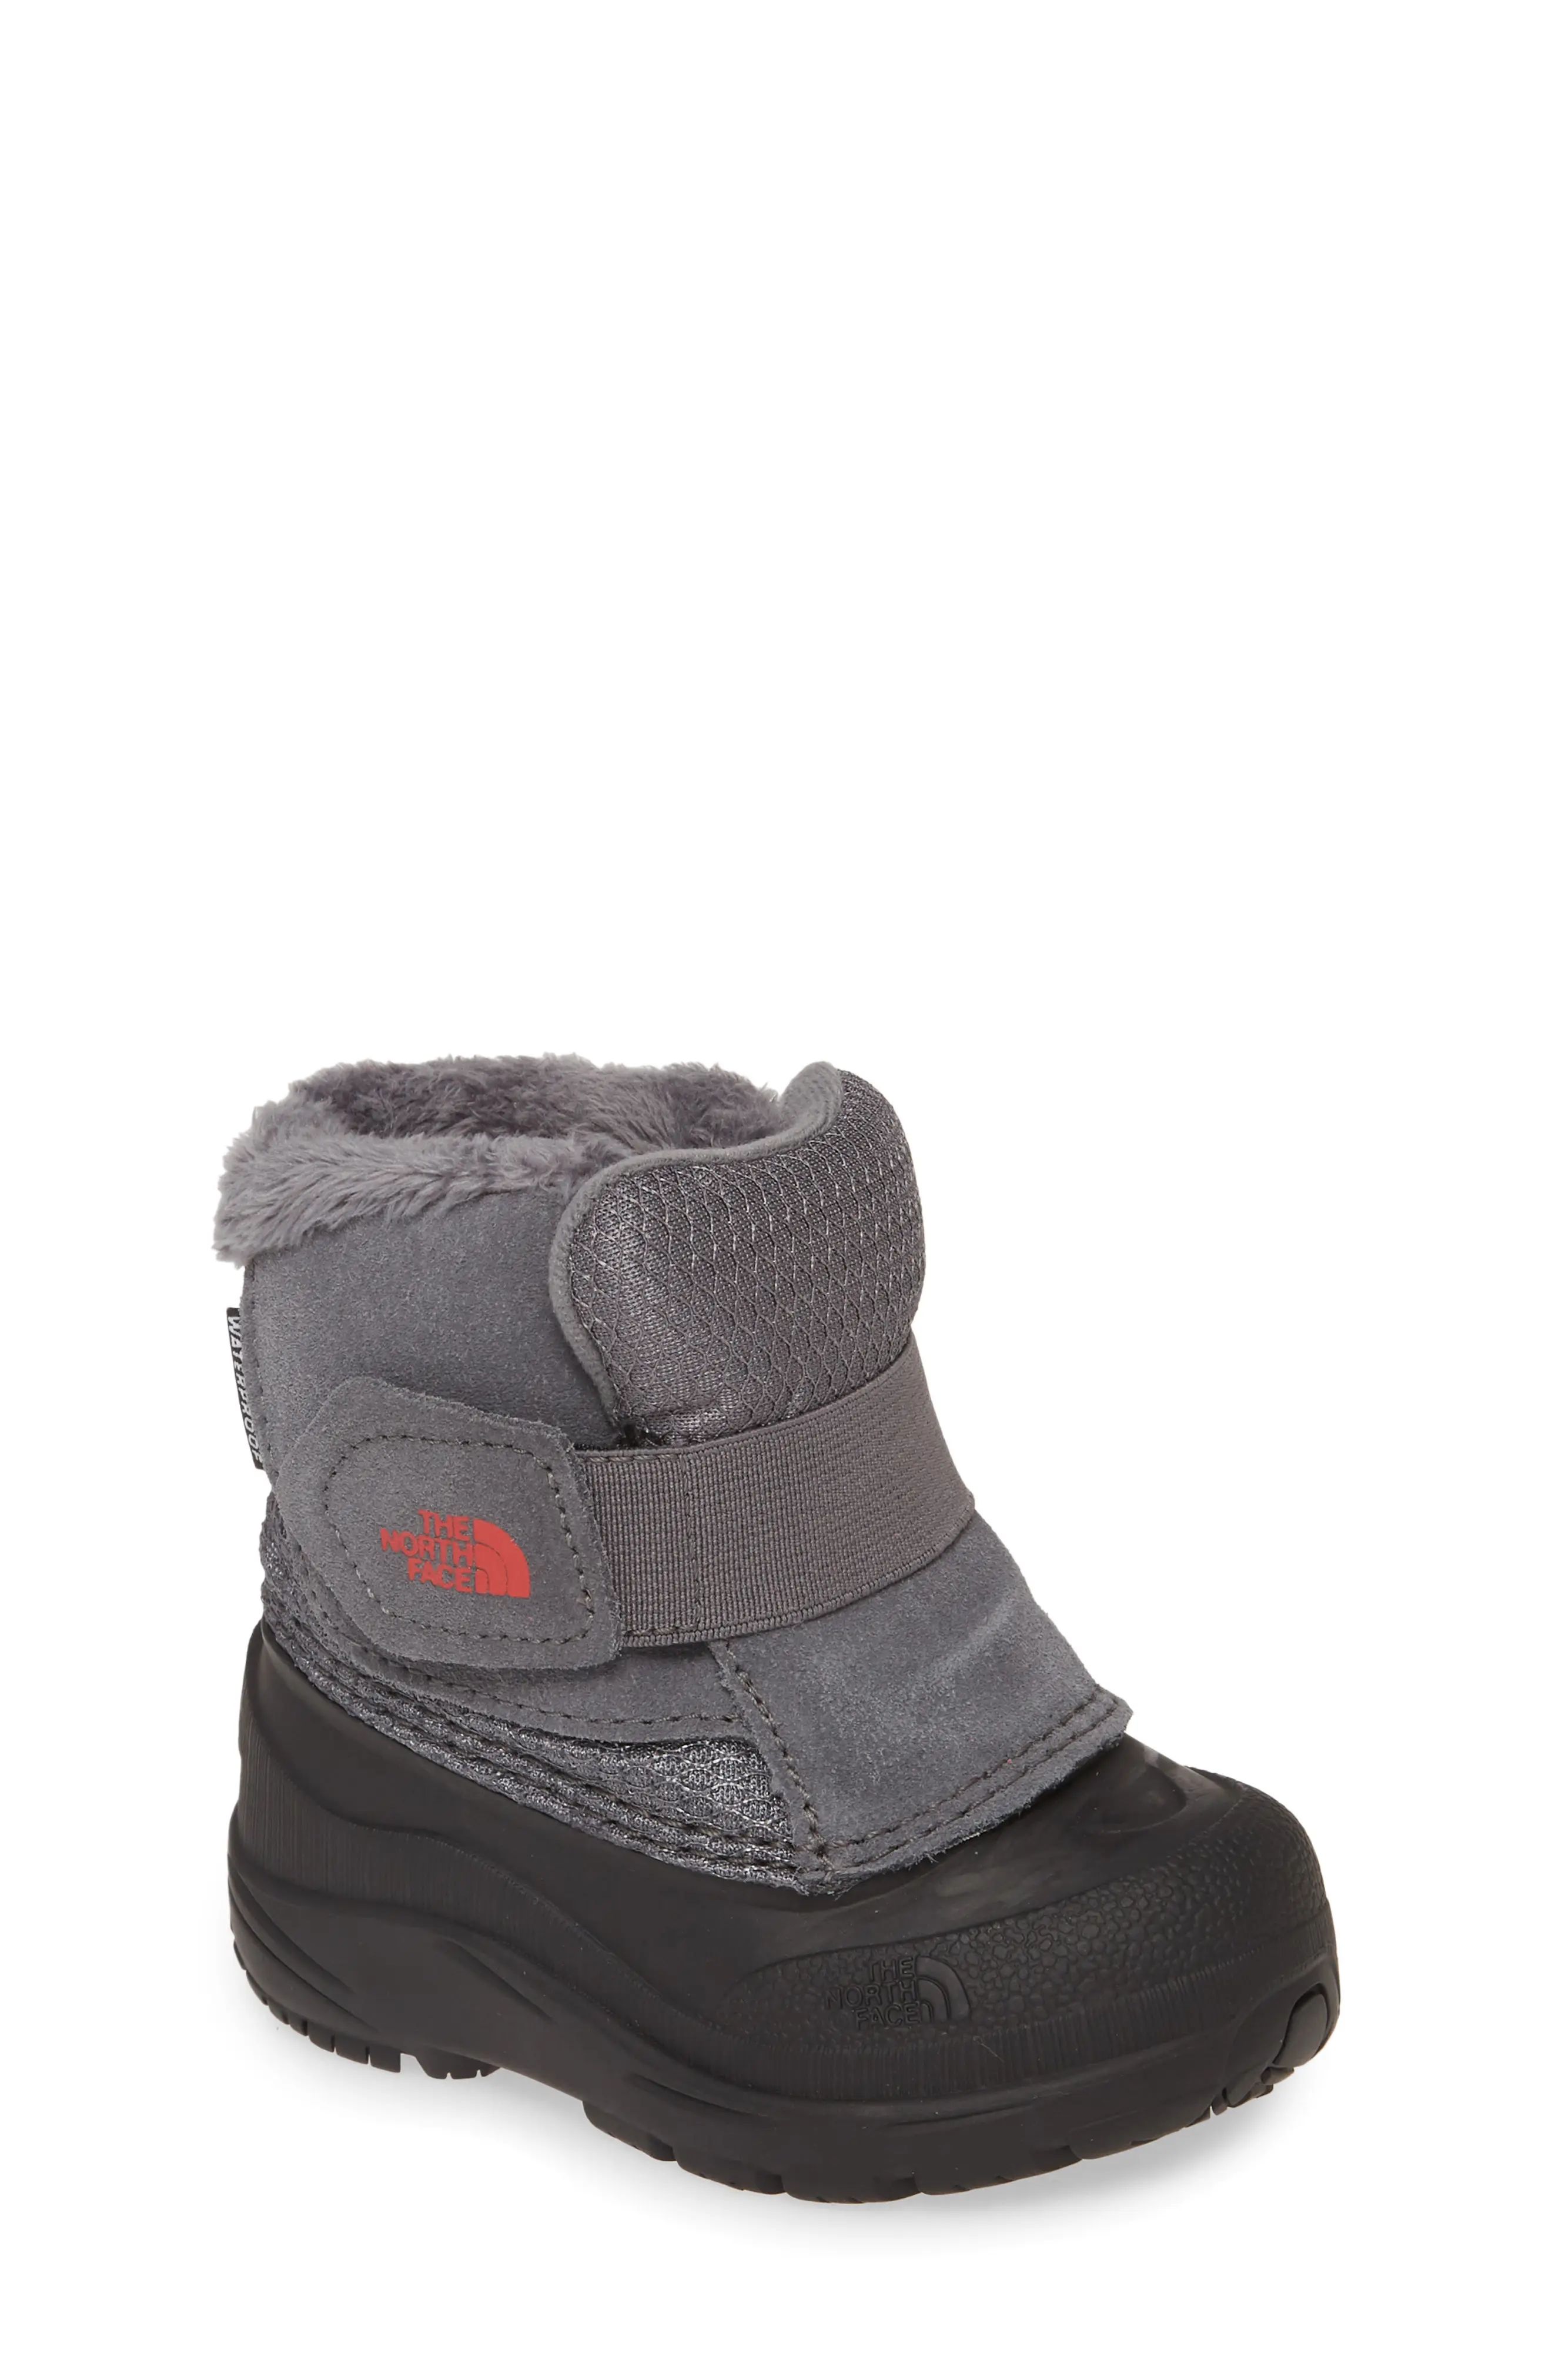 Toddler Girl's The North Face Alpenglow Ii Waterproof Insulated Boot, Size 6 M - Grey | Nordstrom